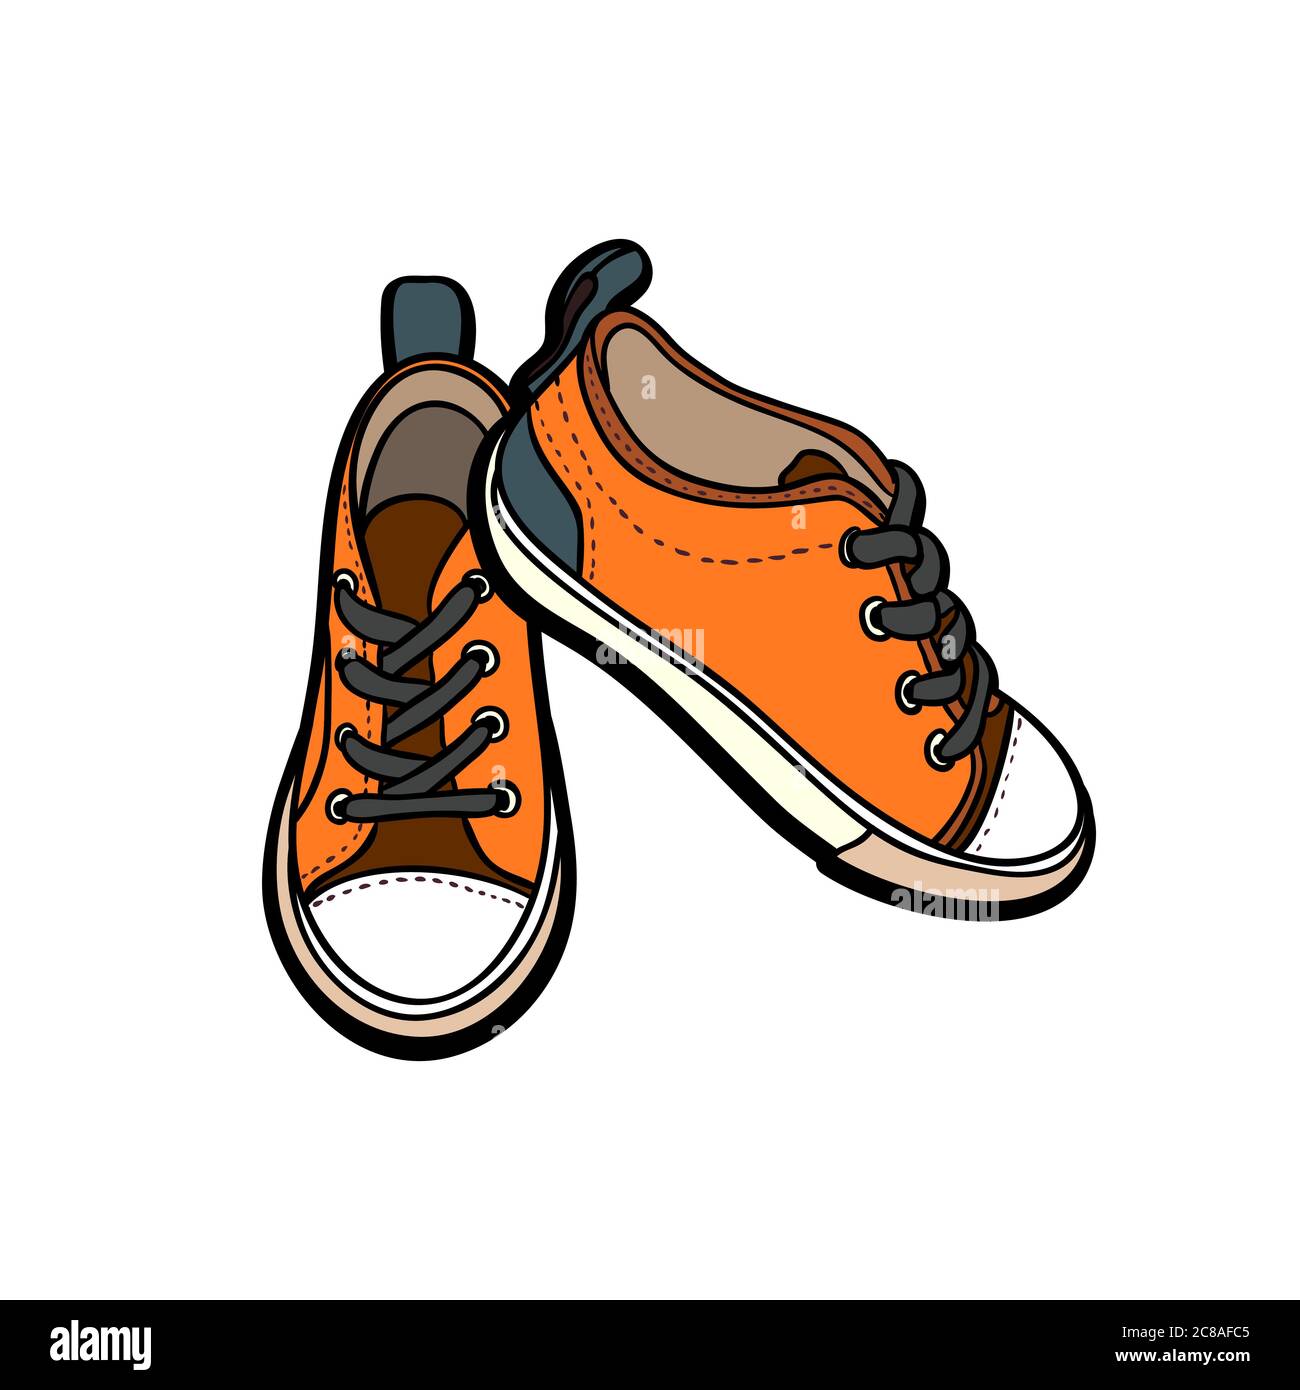 Sneaker shoe front view red icon sport pair Vector Image